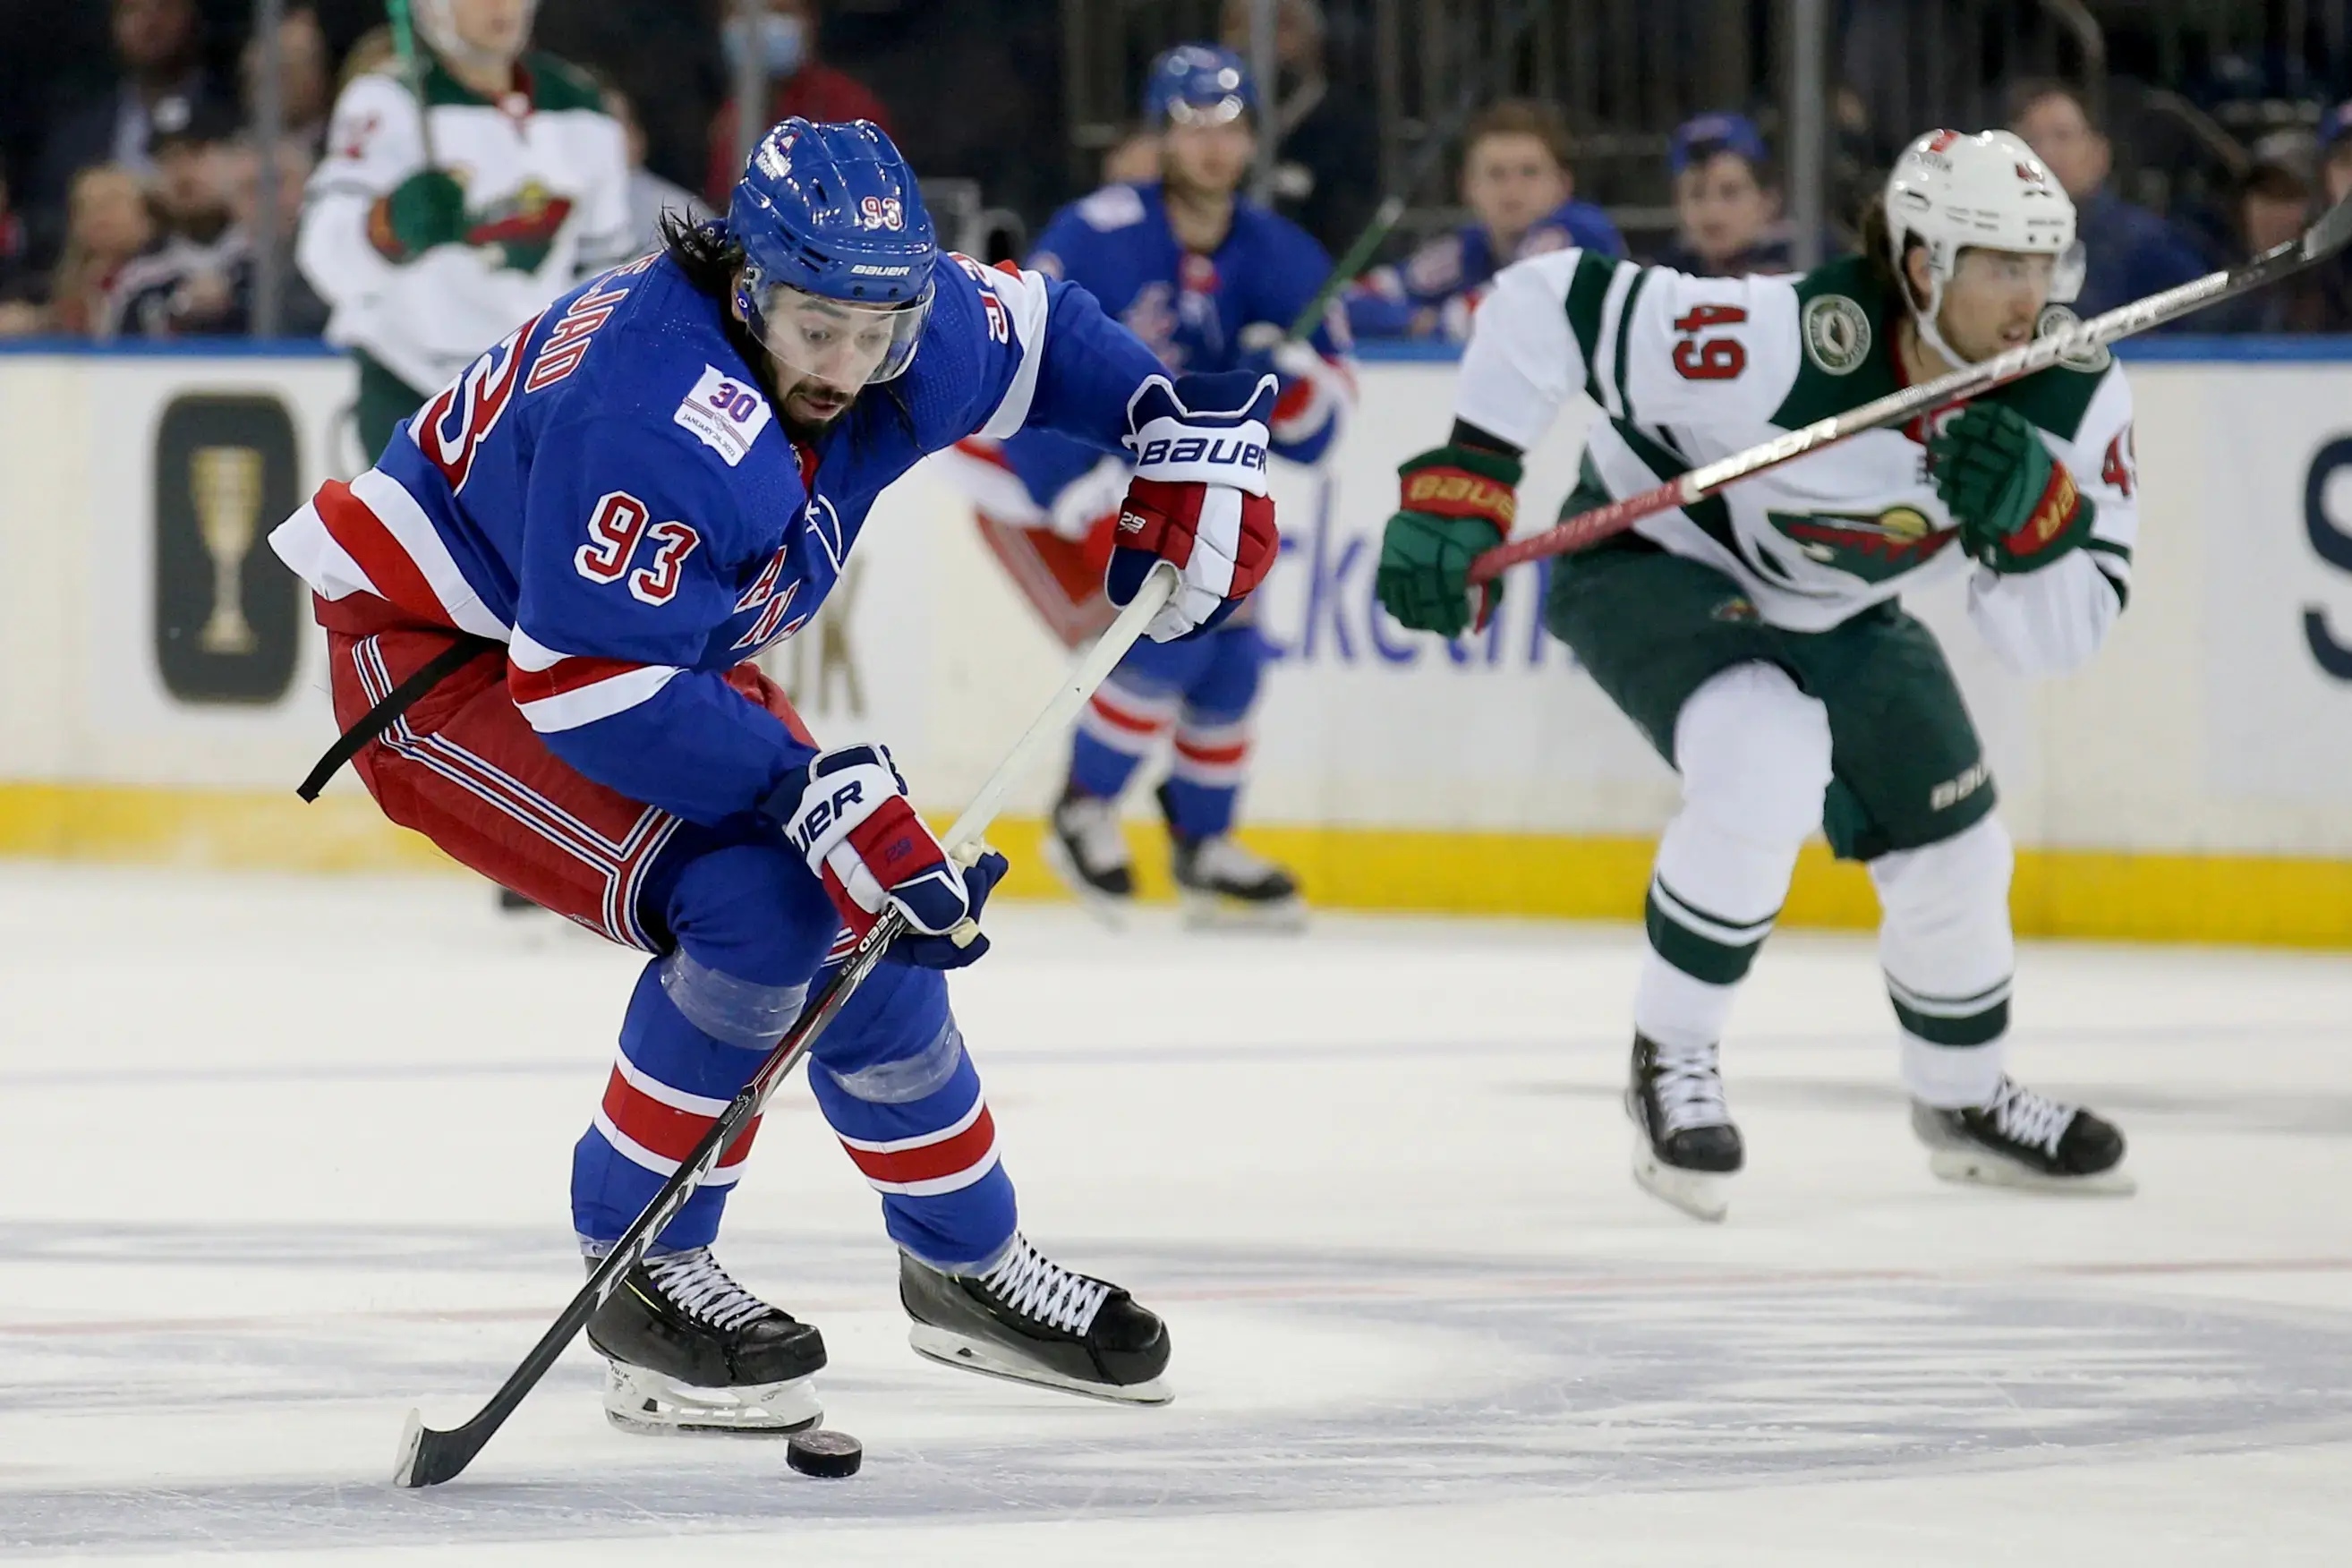 New York Rangers center Mika Zibanejad (93) brings the puck up ice against Minnesota Wild center Victor Rask (49) during the second period at Madison Square Garden. / Brad Penner-USA TODAY Sports